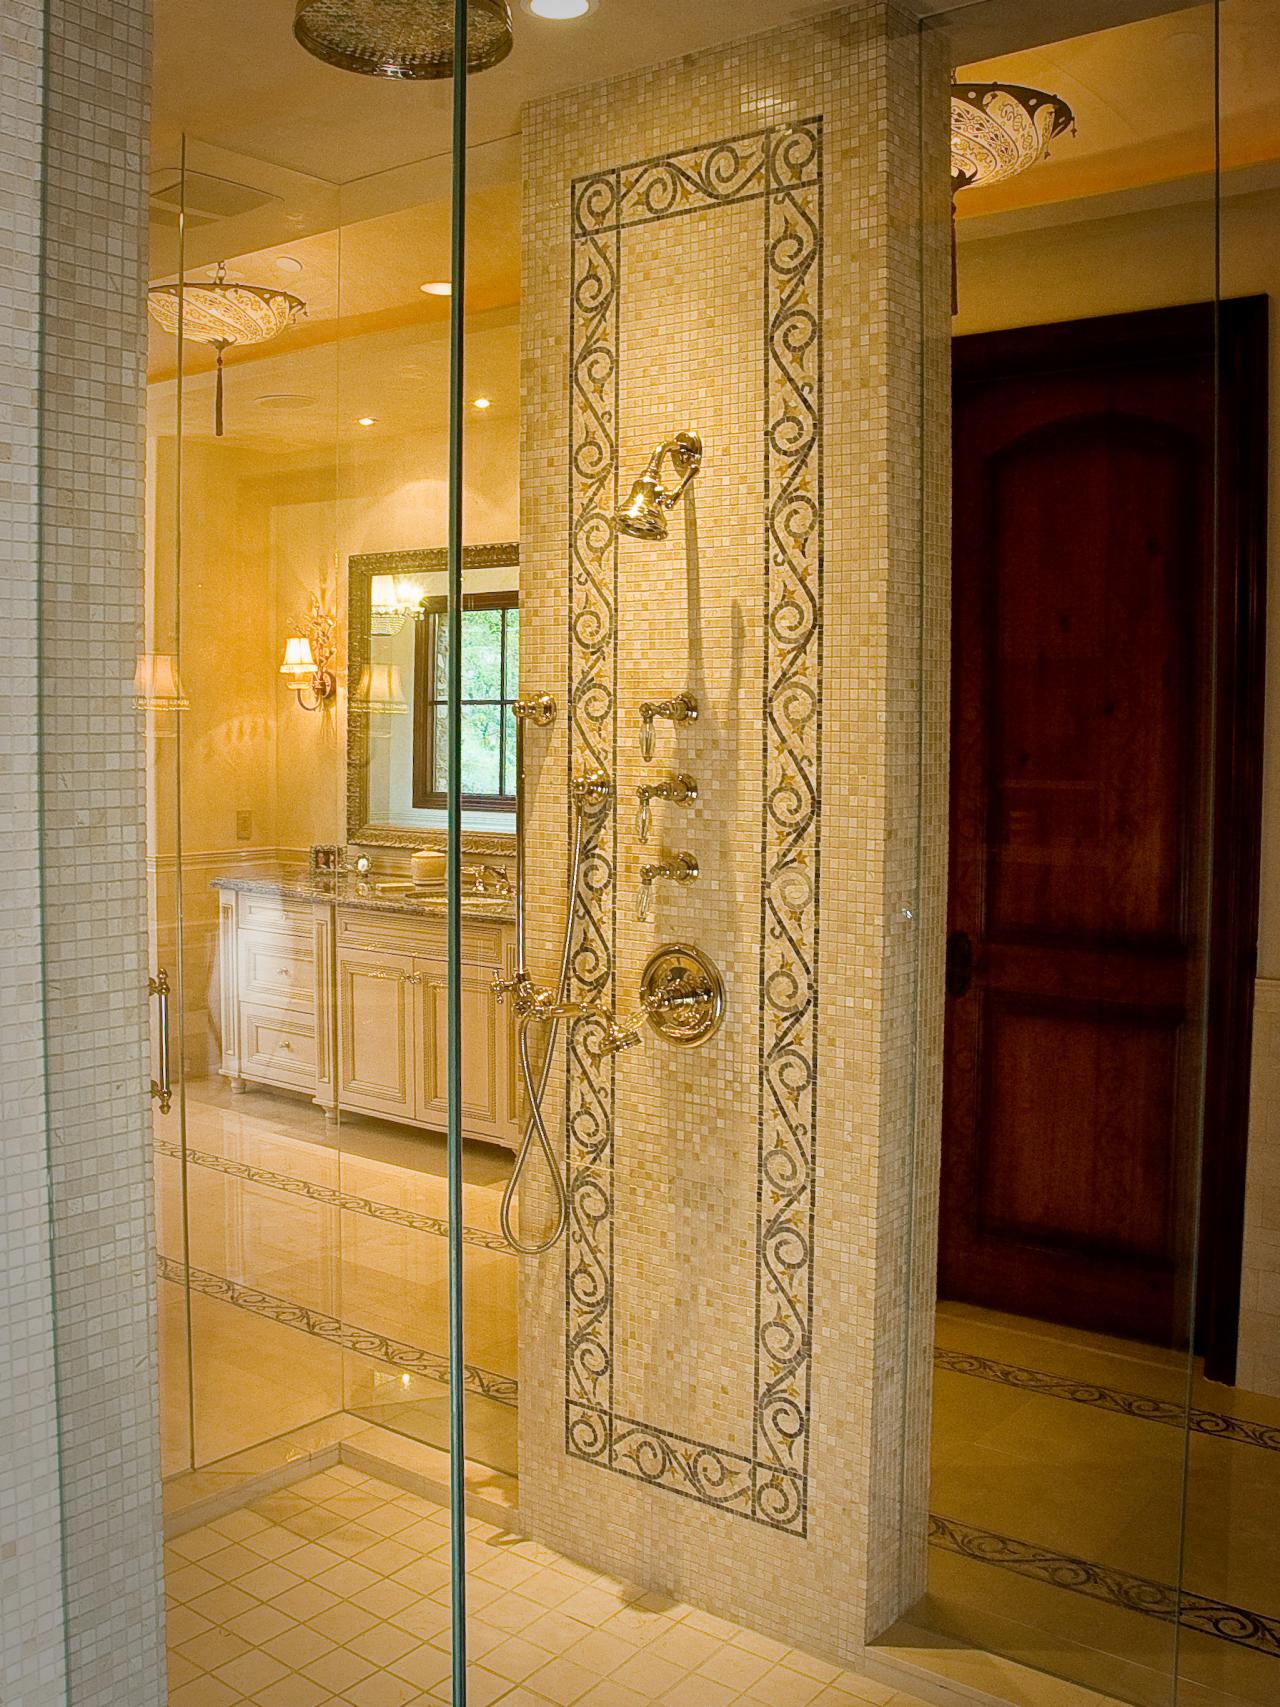 Intricate Shower Tile Wall in Traditional Bathroom | HGTV